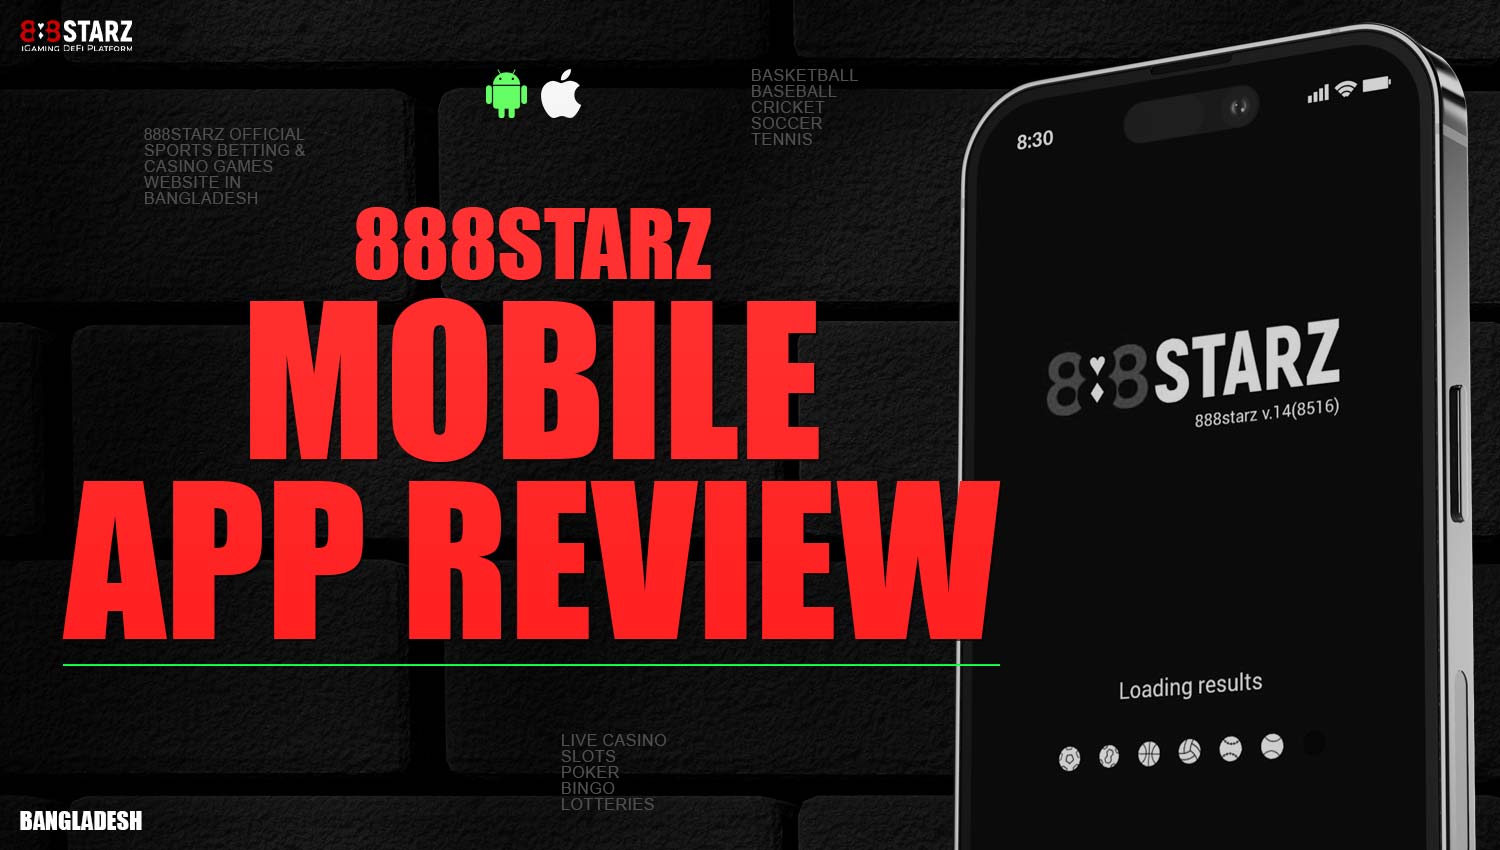 Full review of the 888Starz mobile application.